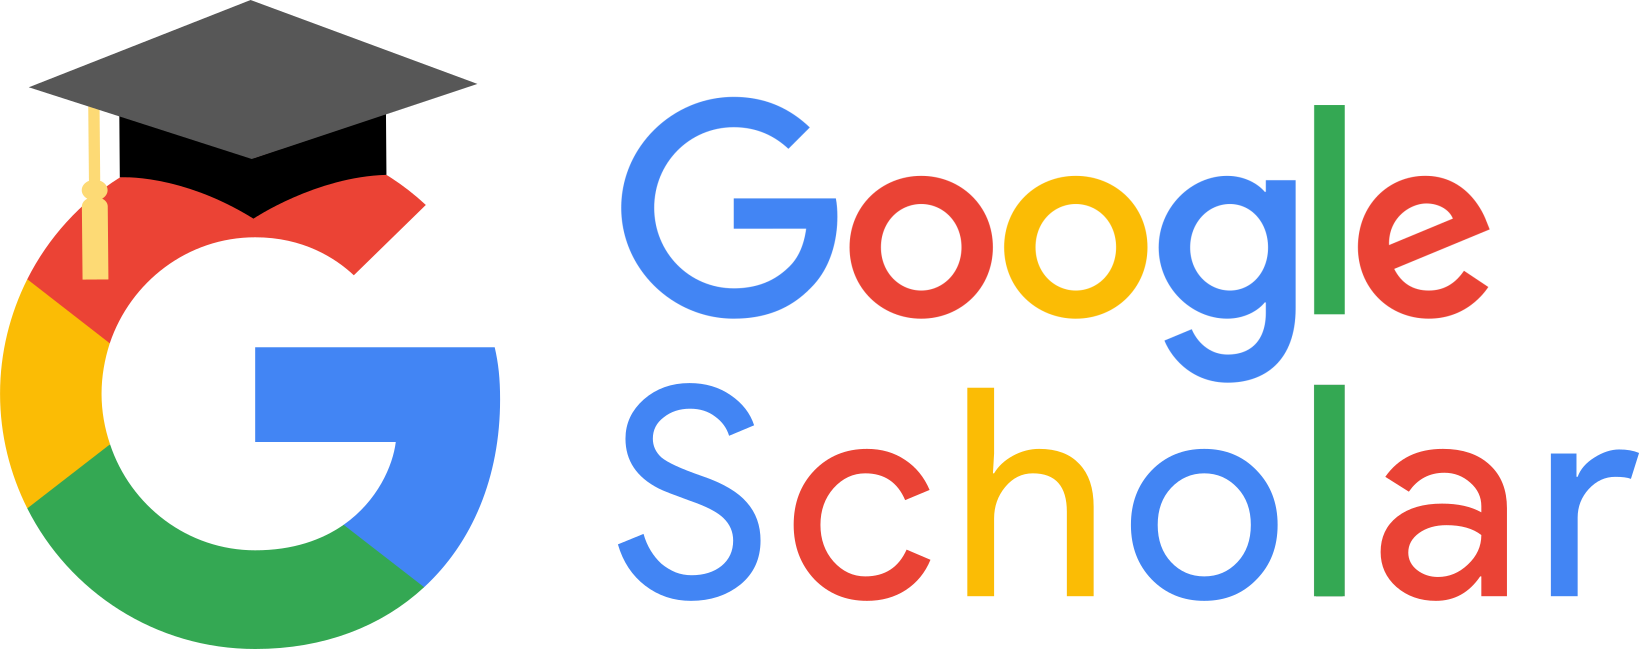 This is the Google Scholar logo